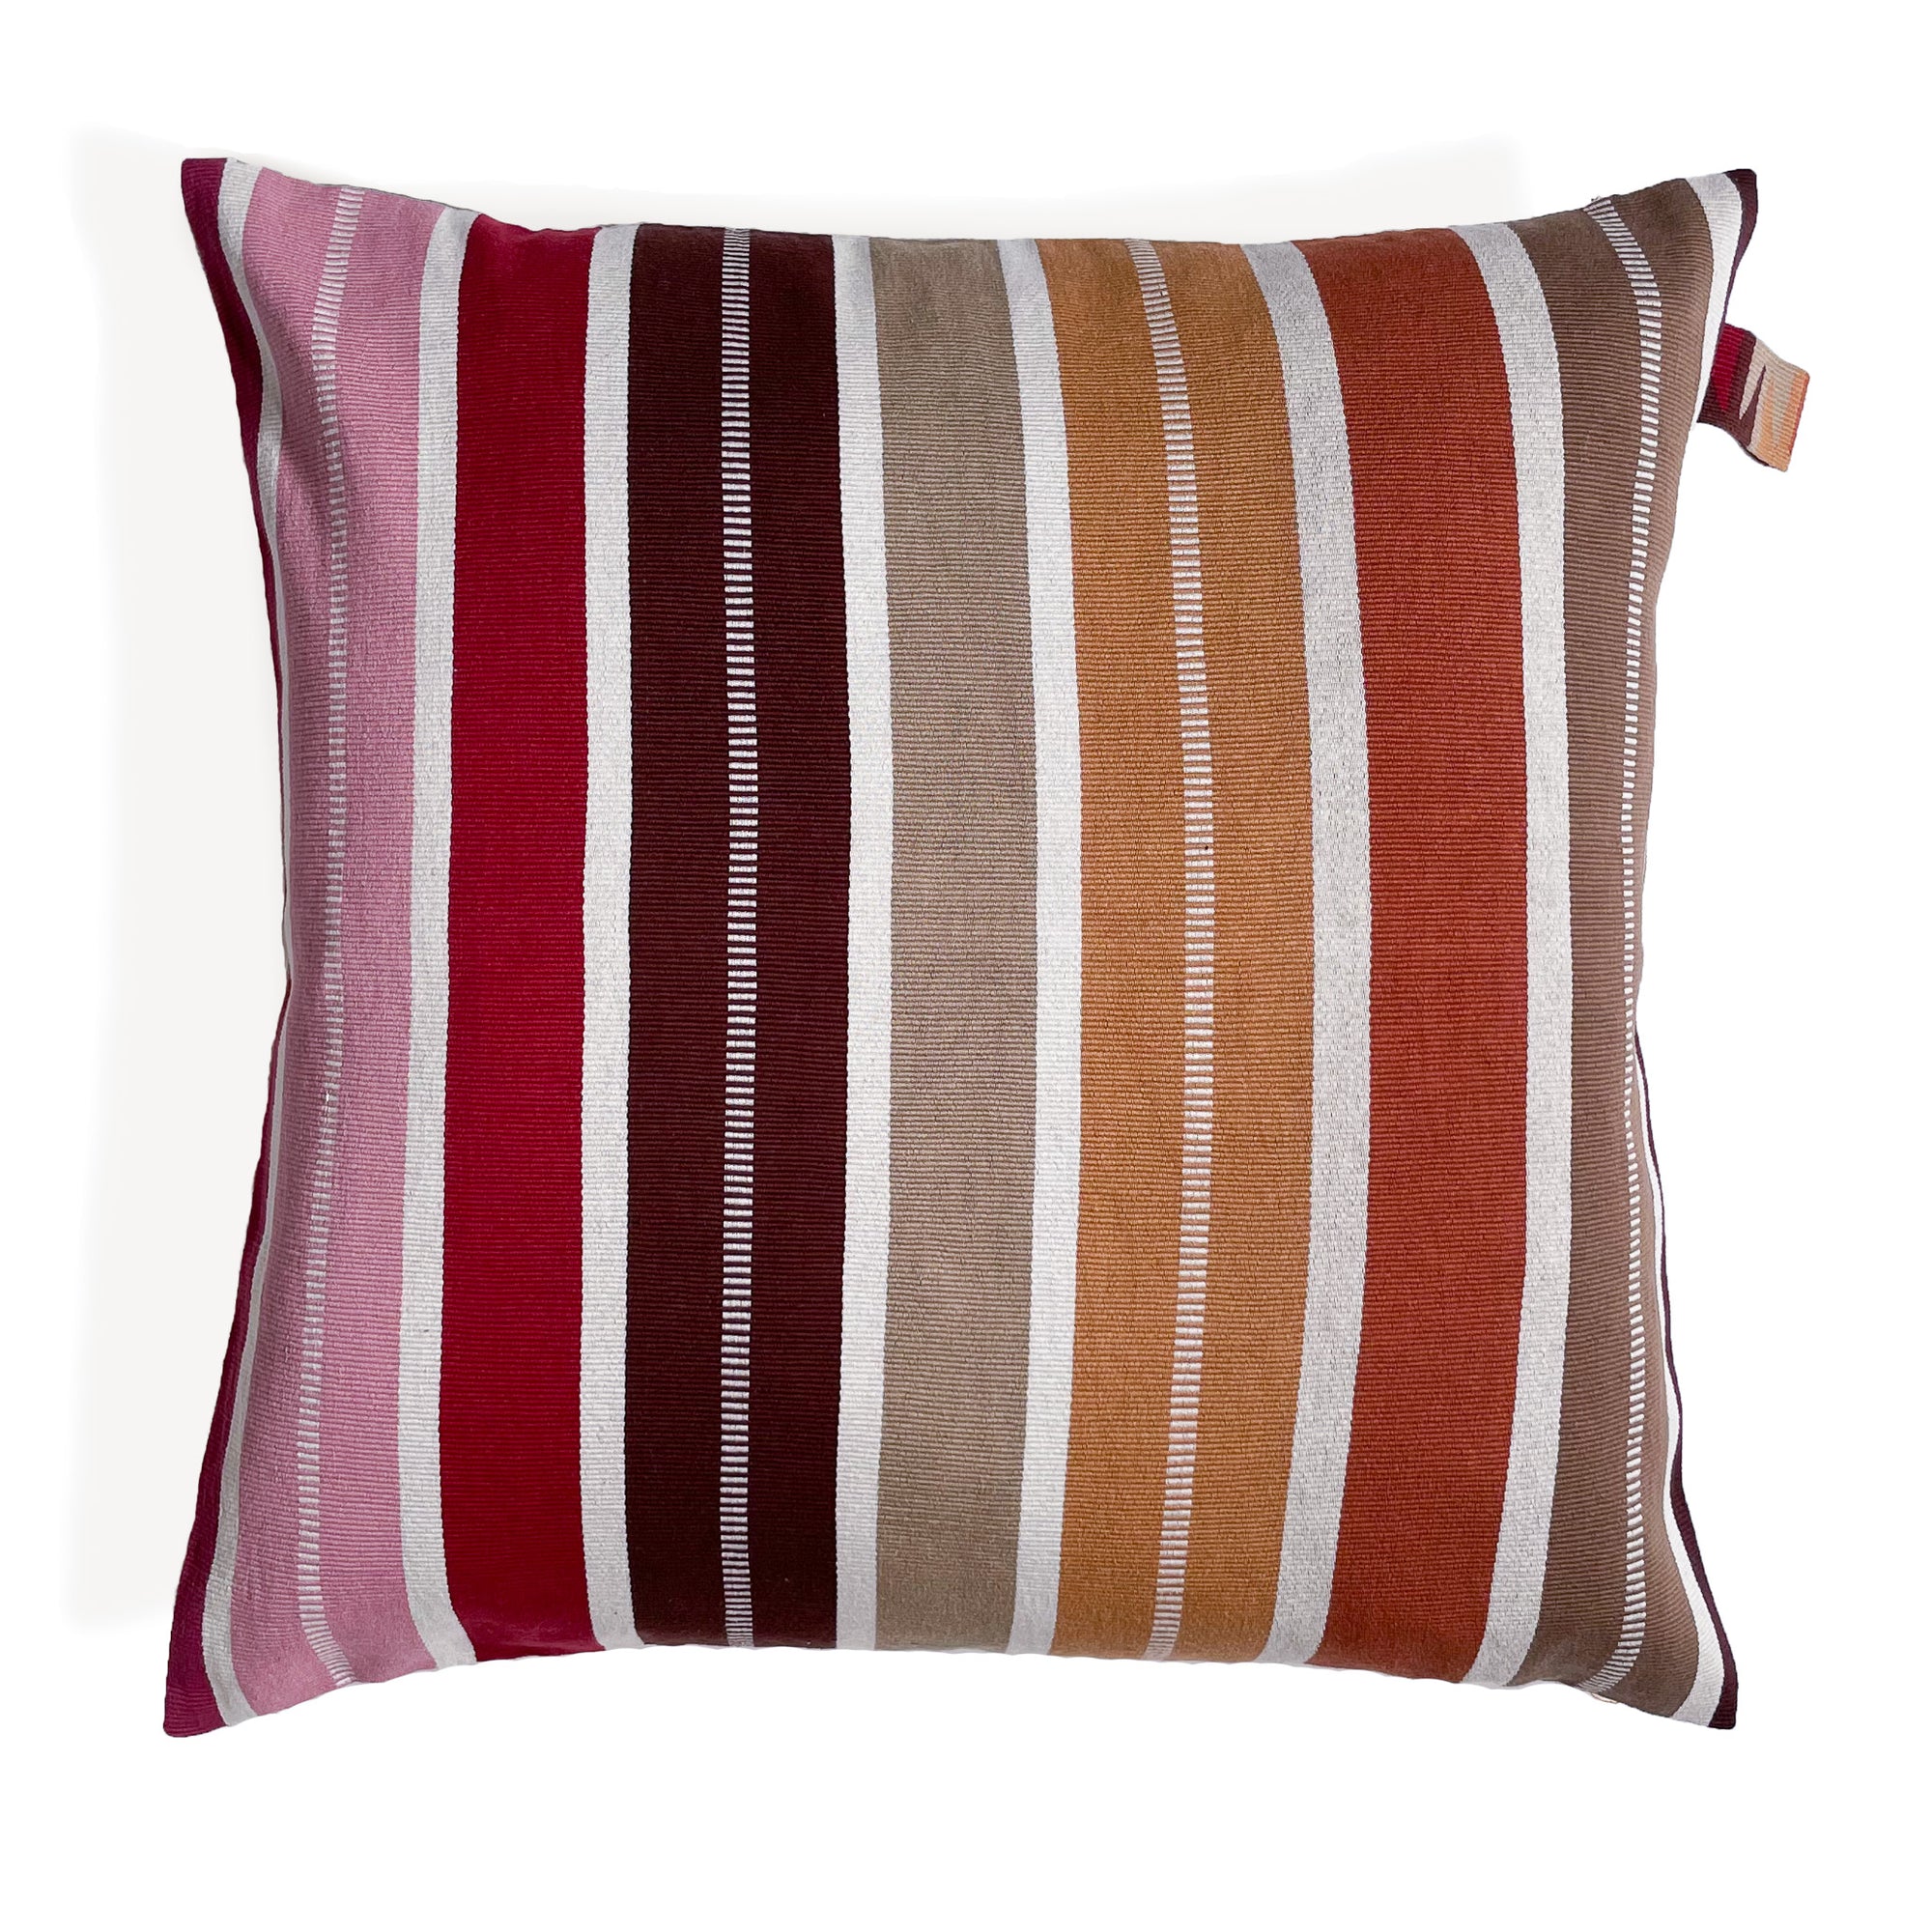 Front view of cushion with colorful stripes grading from pink to red to shades of brown, with colorful cinta tag